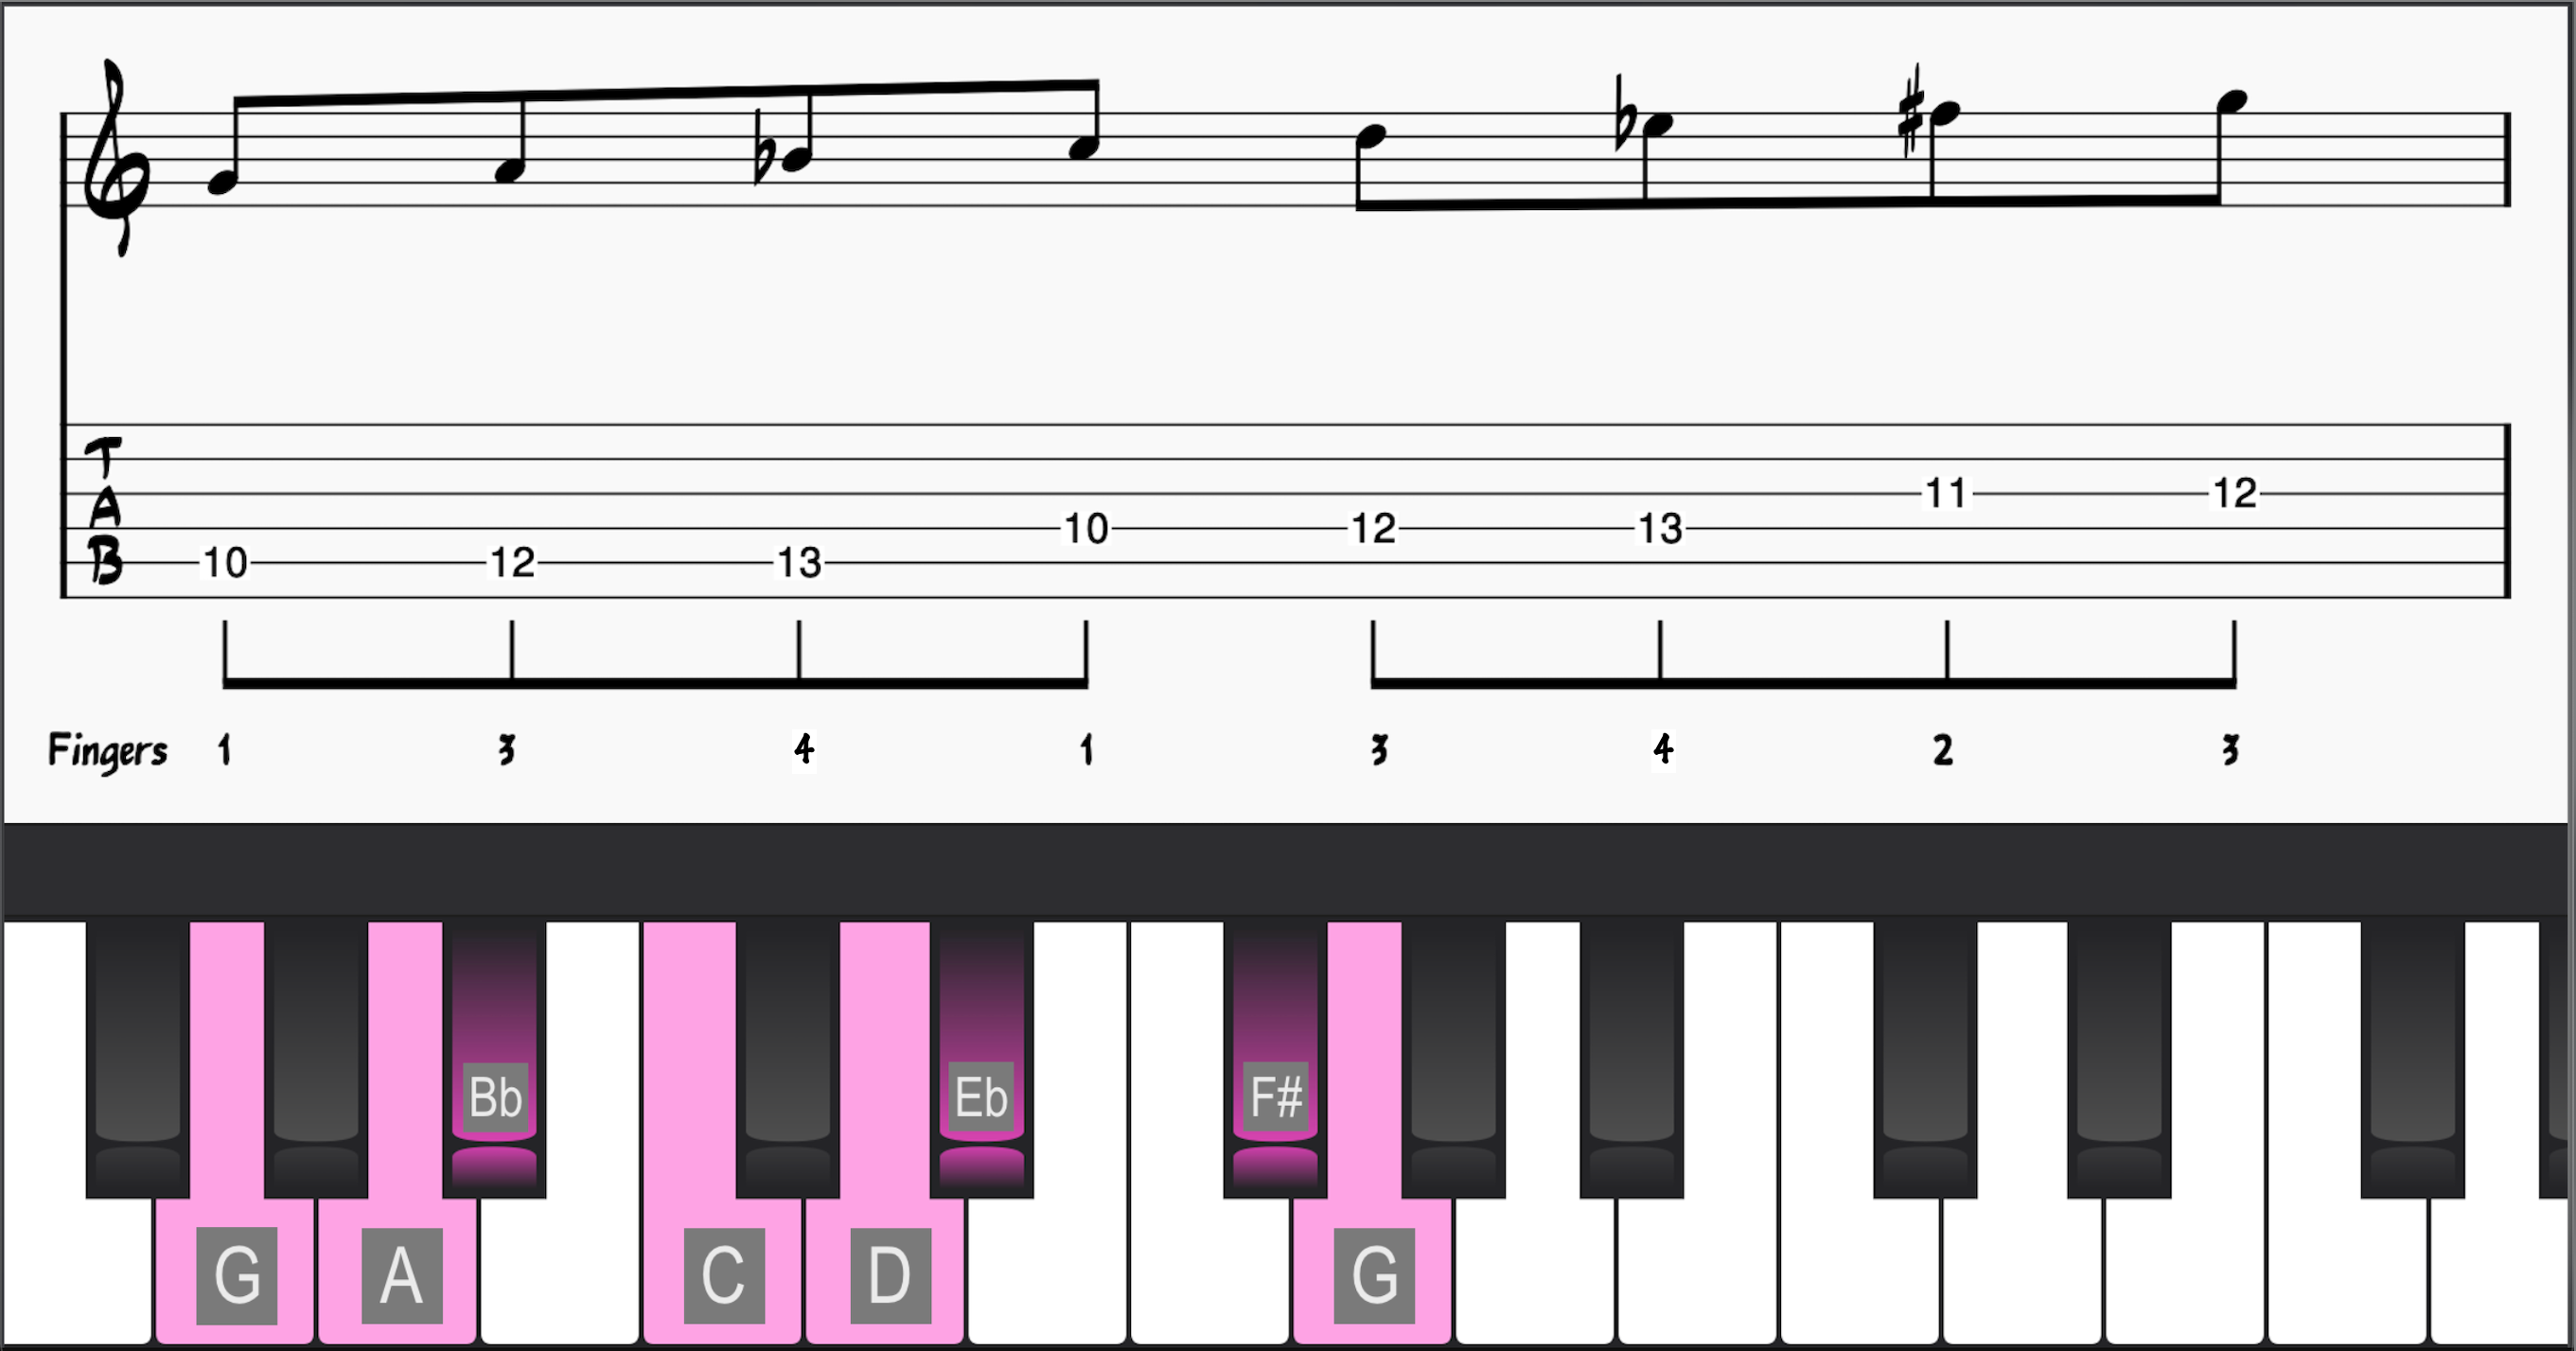 G Harmonic Minor Scale on Piano and Guitar